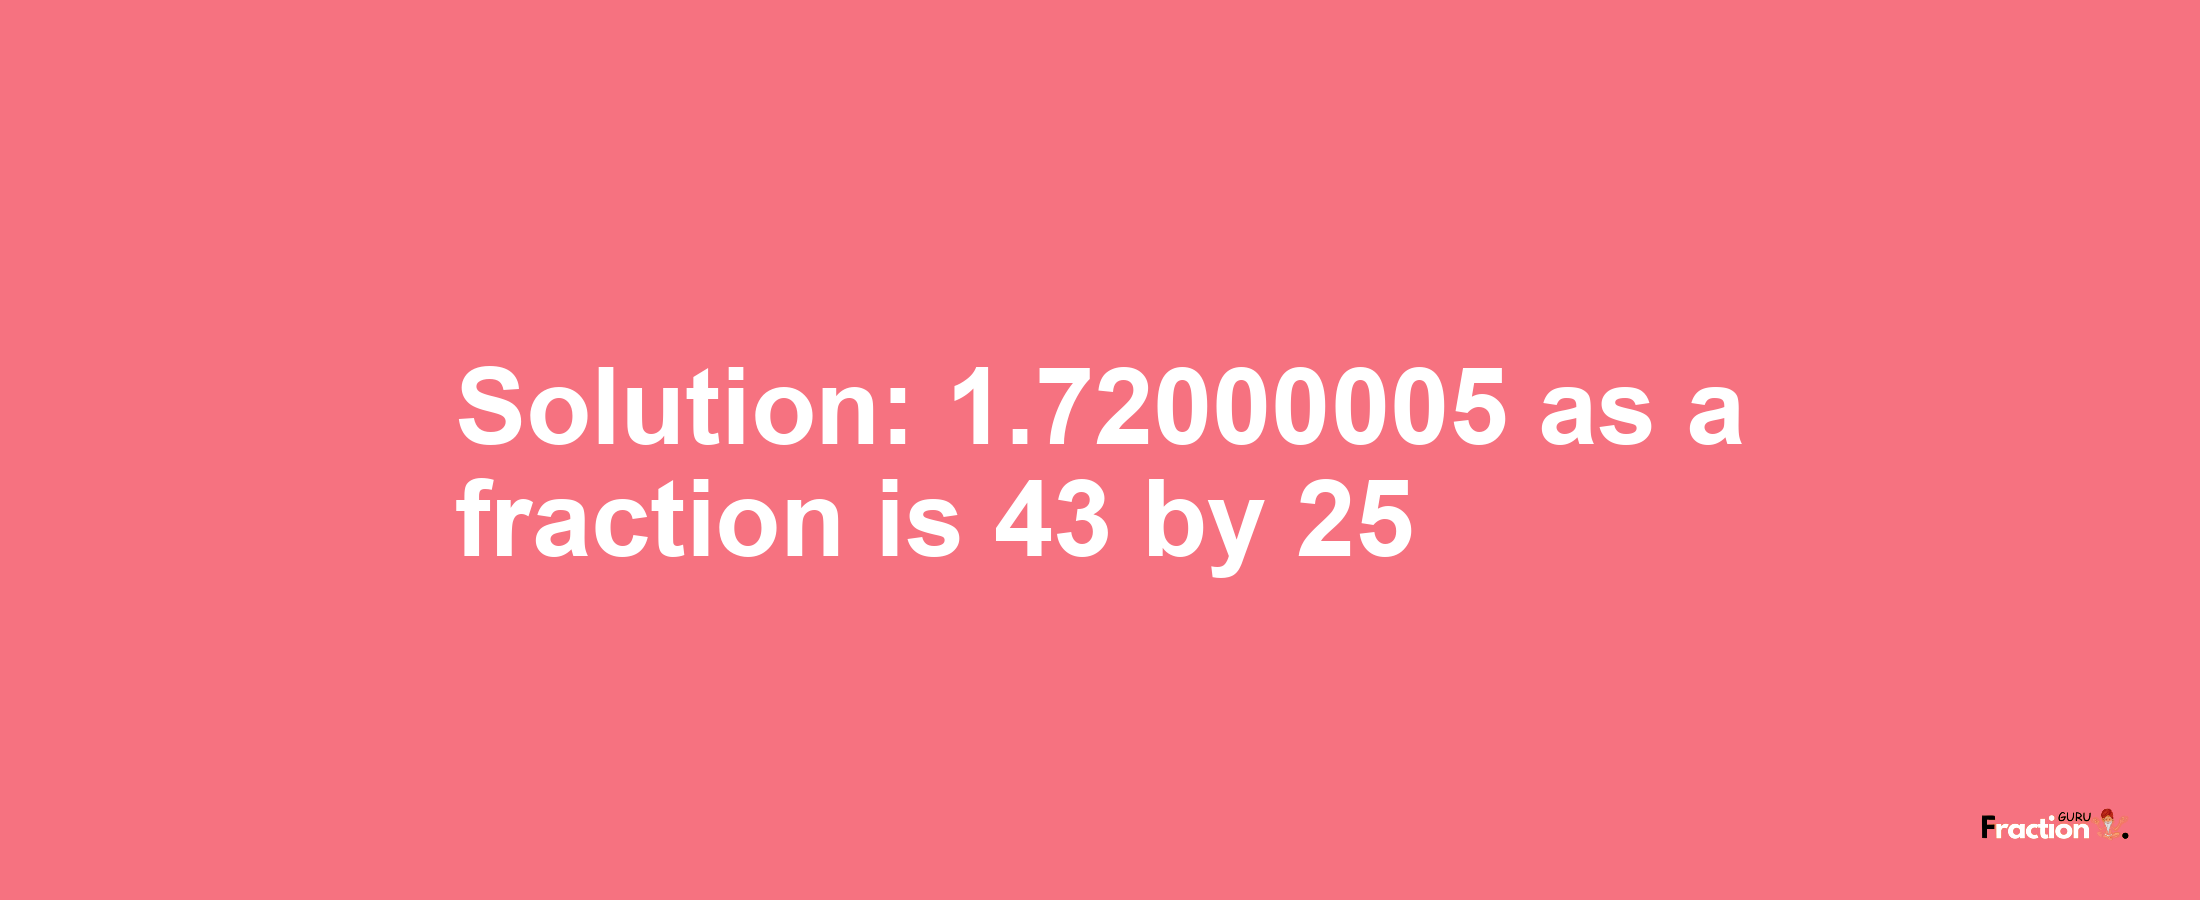 Solution:1.72000005 as a fraction is 43/25